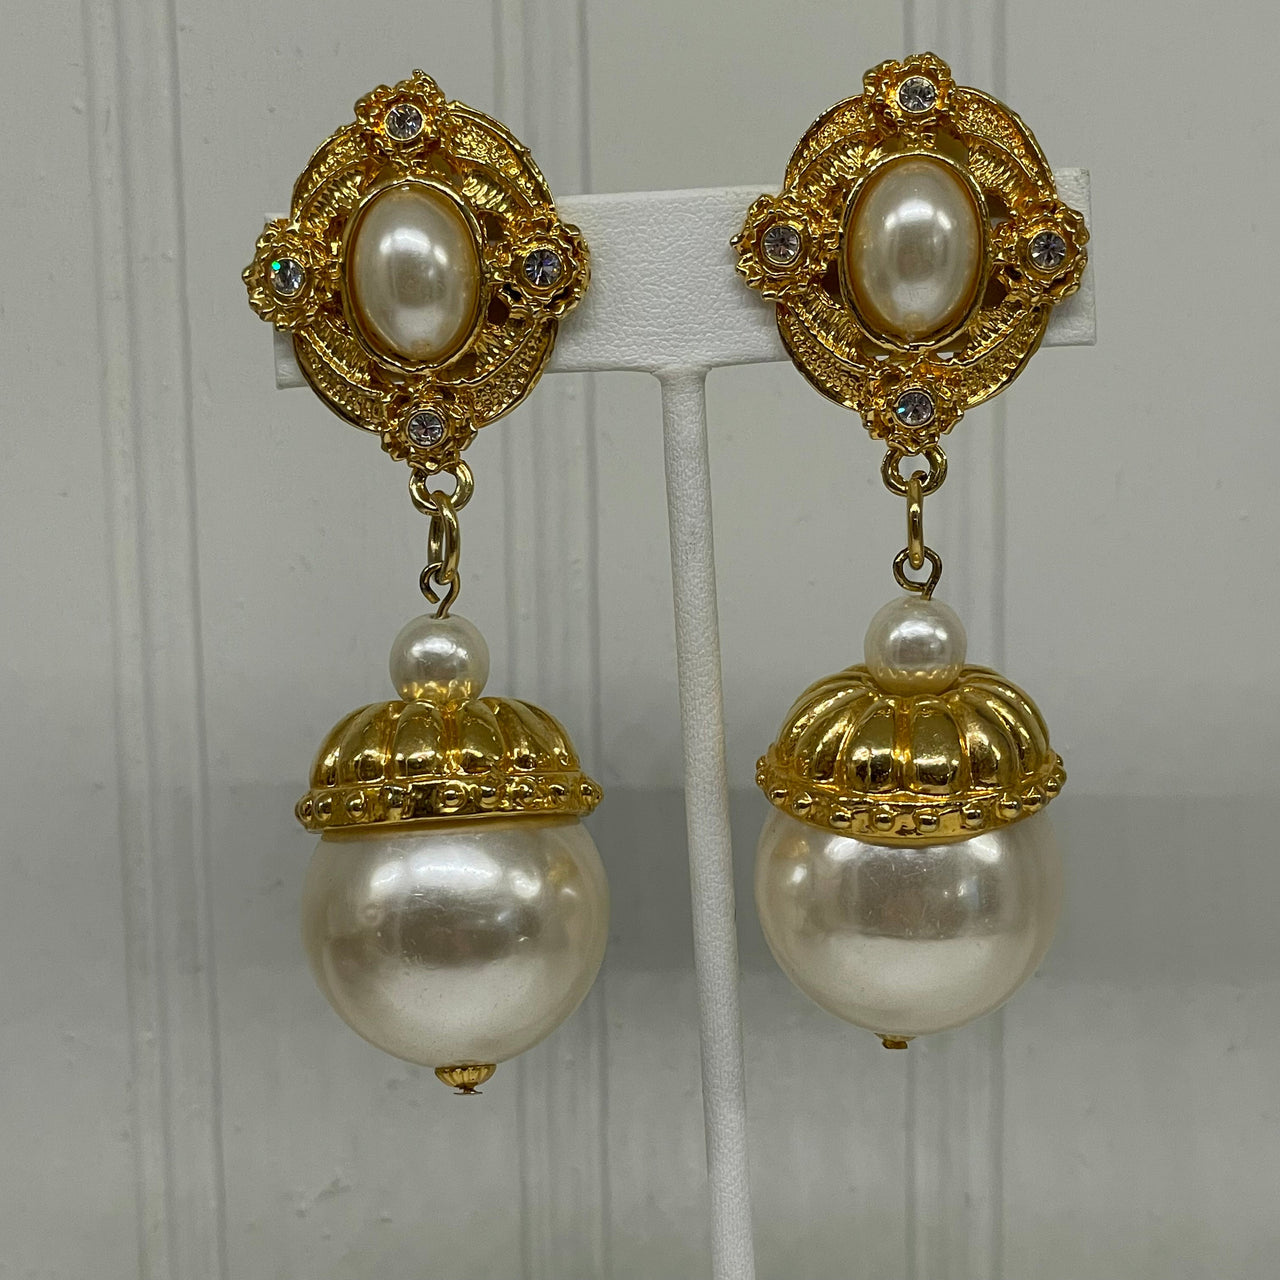 Large Gold Pearl and Rhinestone Earrings Bloomers and Frocks 